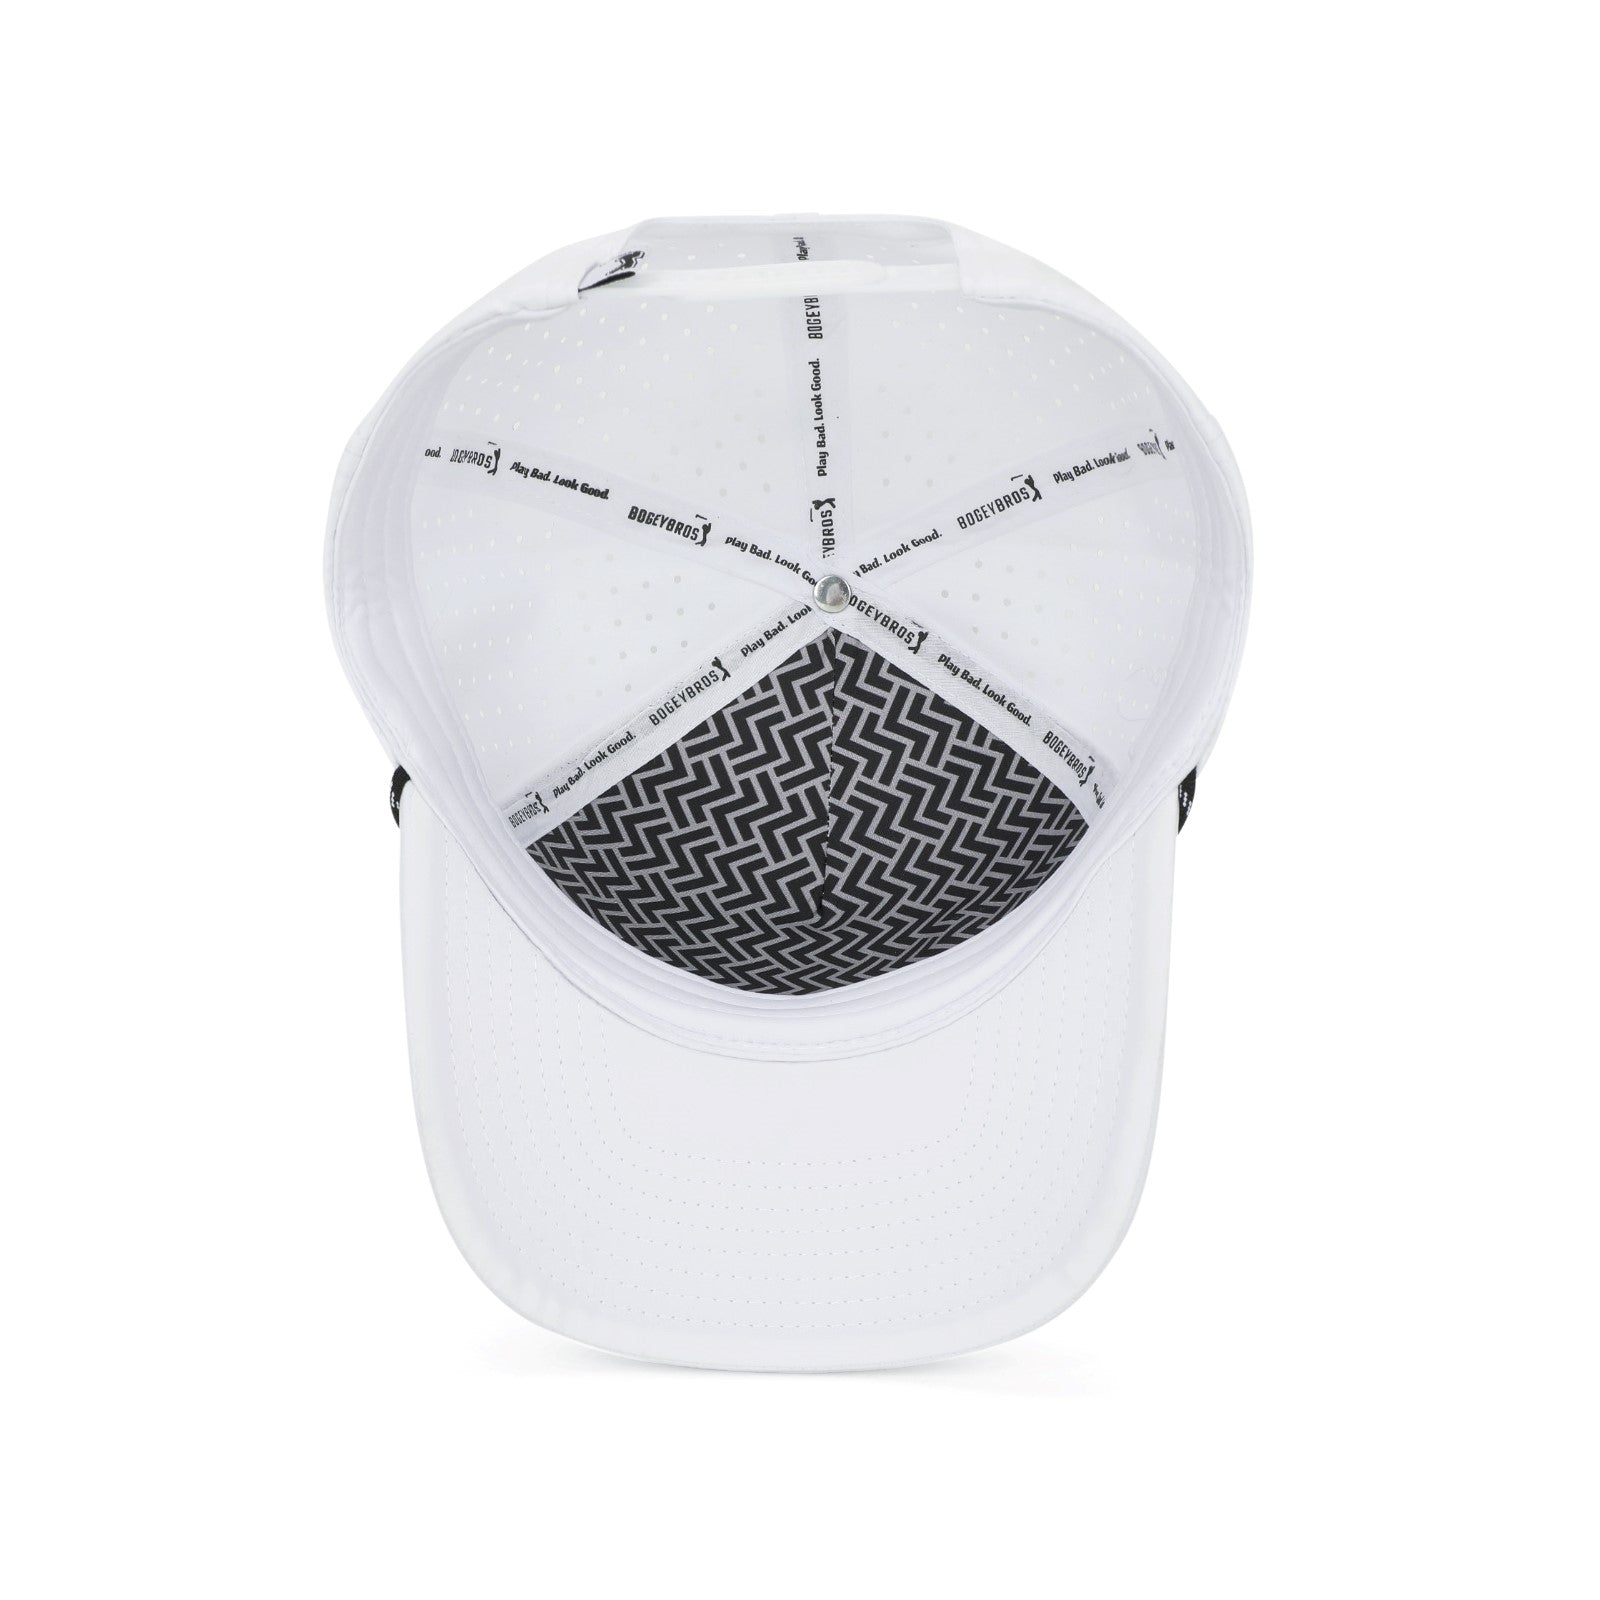 PULL OUT - Performance Golf Rope Hat - Snapback